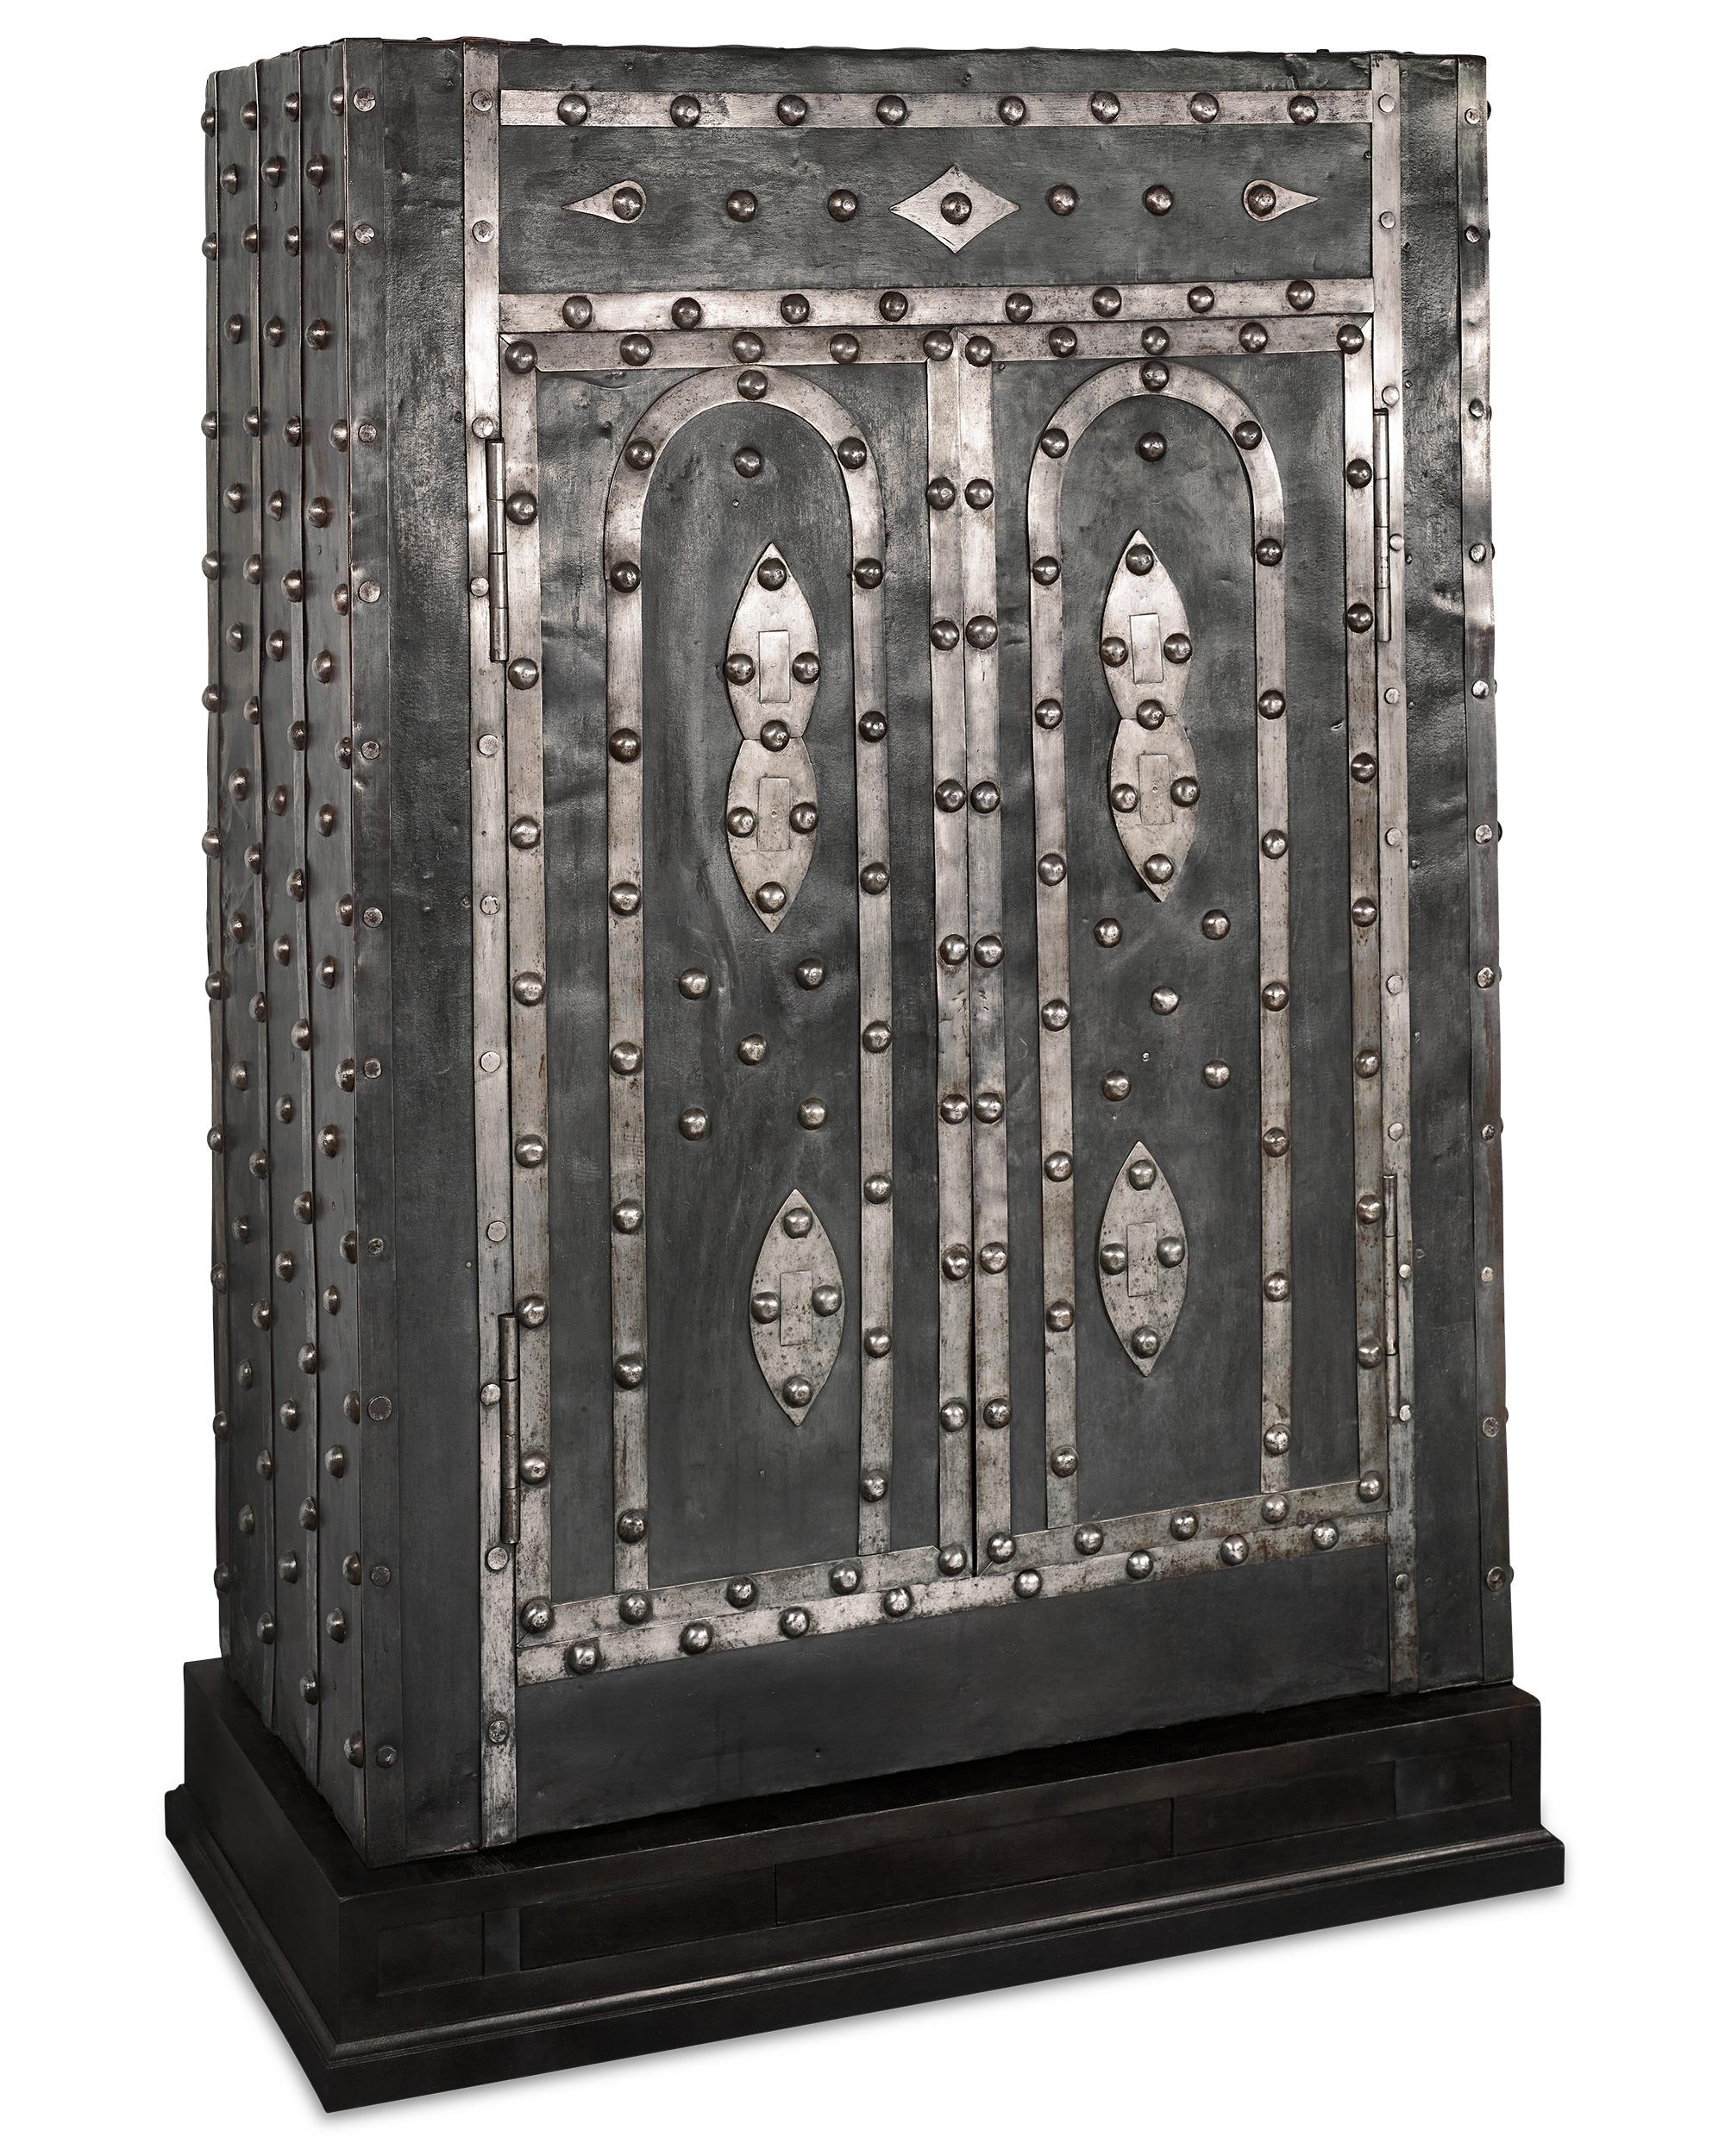 A marvel of mechanical complexity and exceptional craftsmanship, this monumental Italian safe was one of the most secure means by which valuables could be stored in the 19th century. The iron structure is covered with thick iron plates, polished